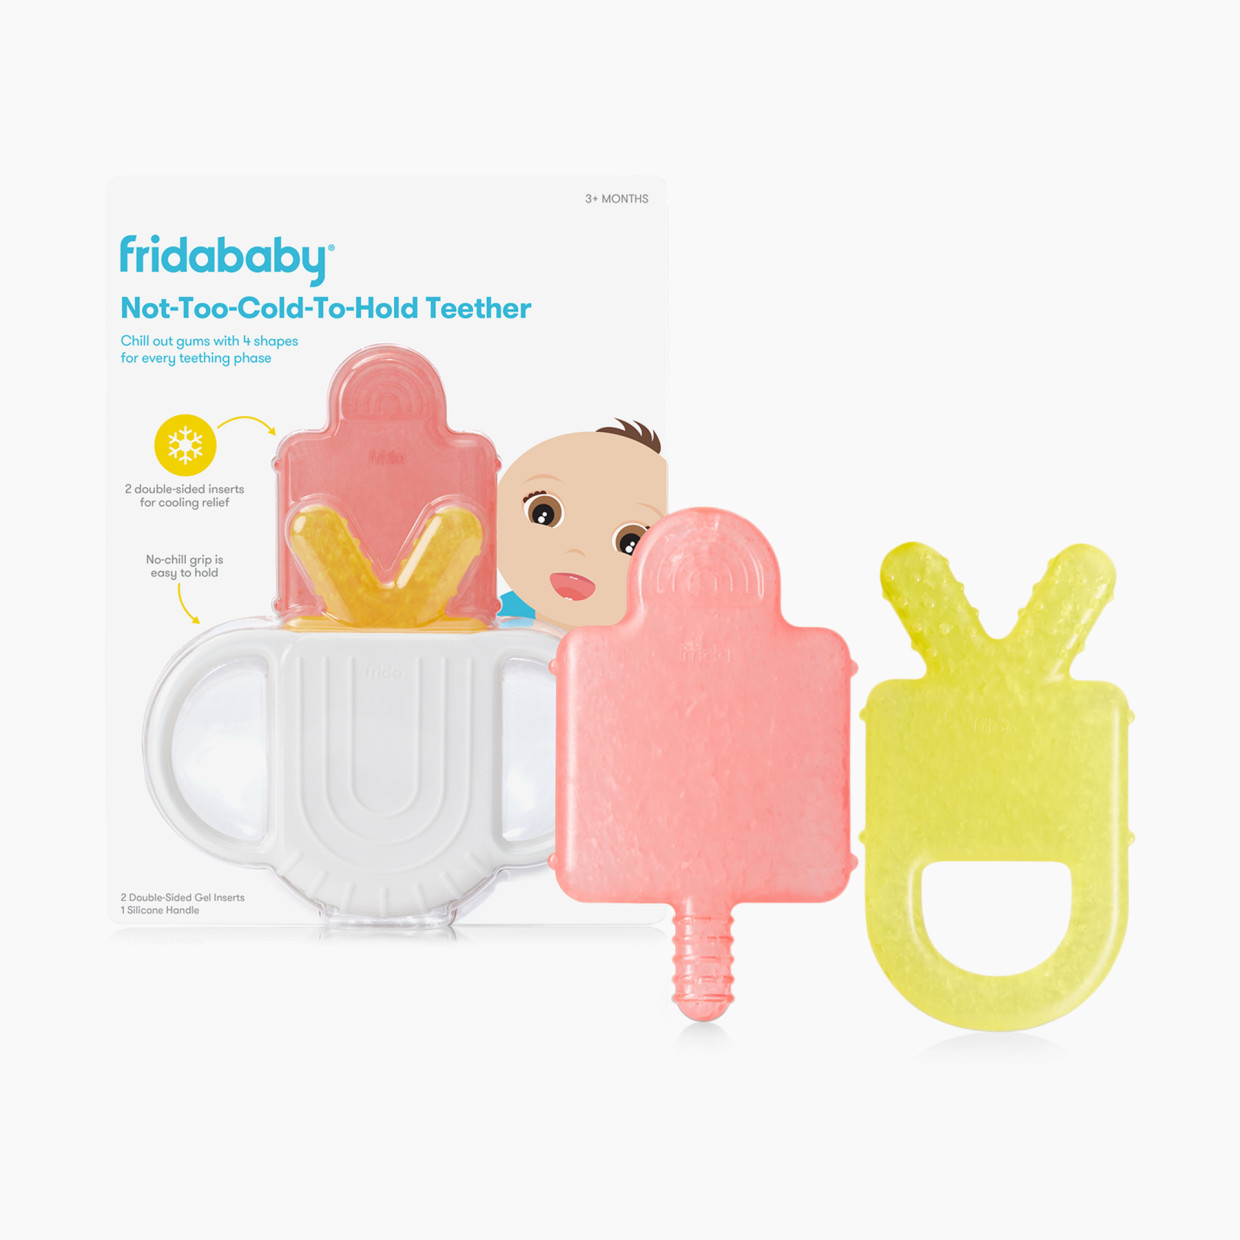 FridaBaby Not-Too-Cold-To-Hold Teether.